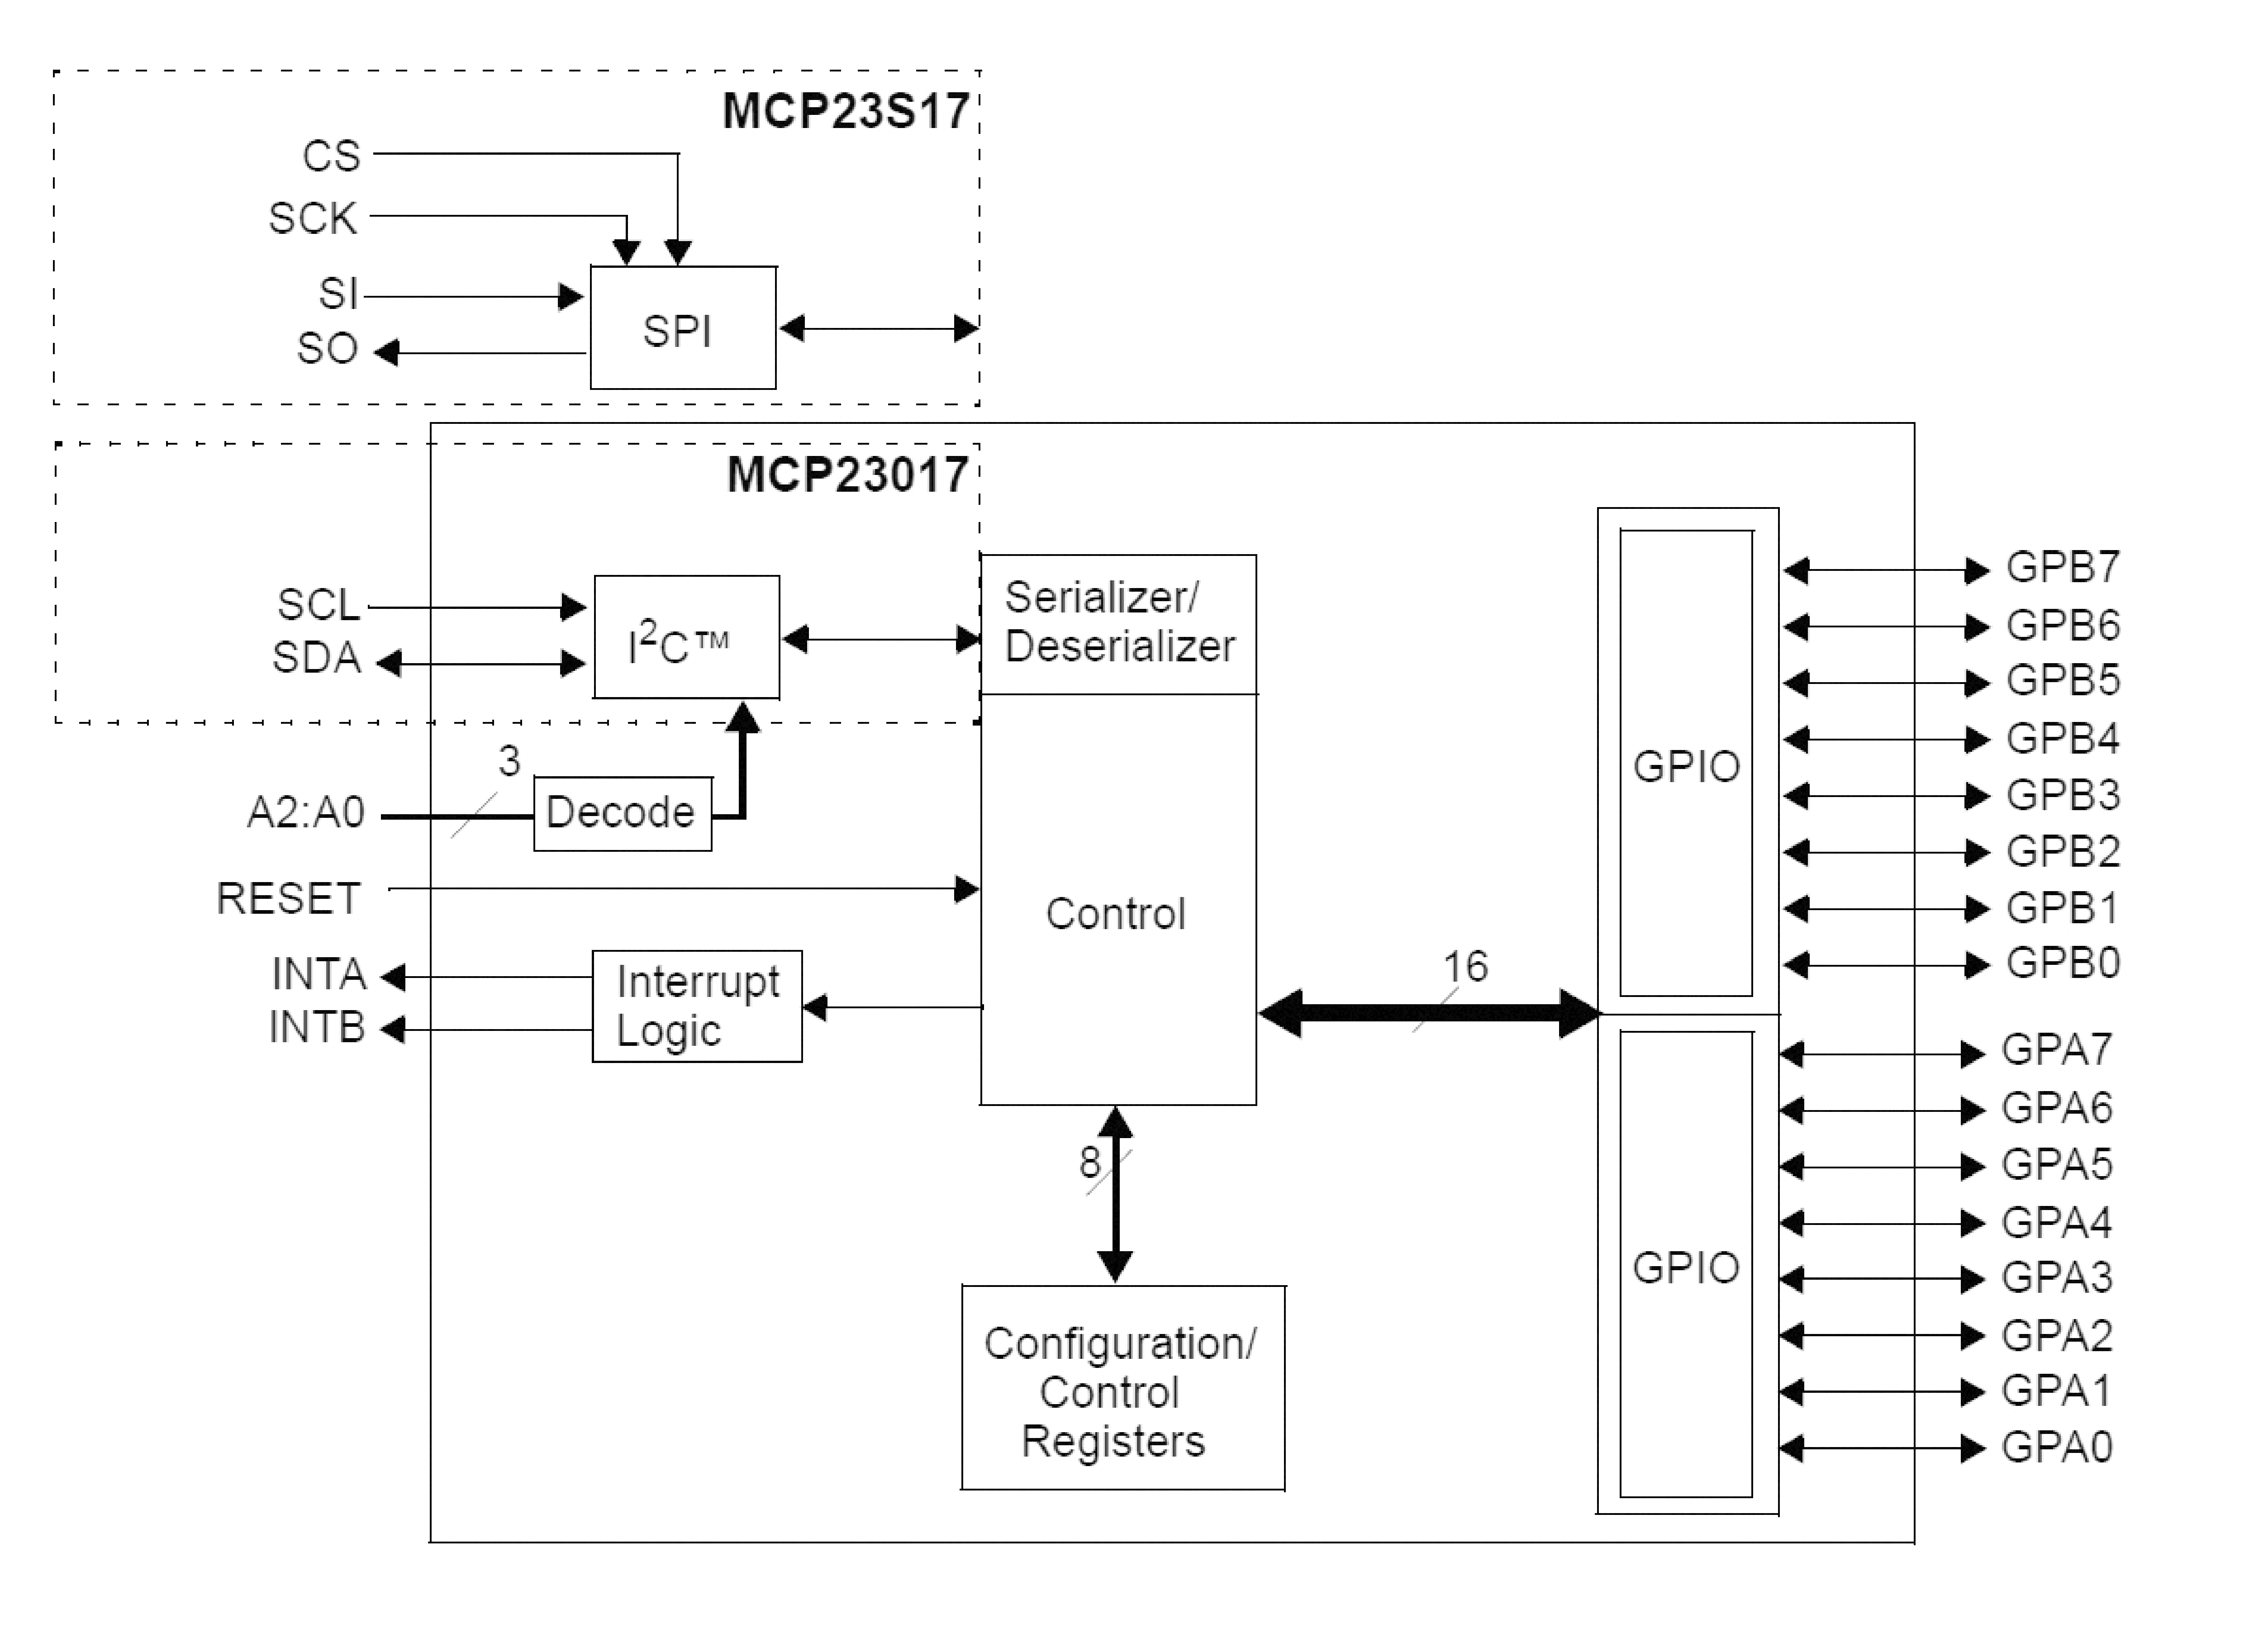 Block diagram of the MCP23017: the SPI variant, which distinguishes MCP23017 from MCP23017, is also shown.